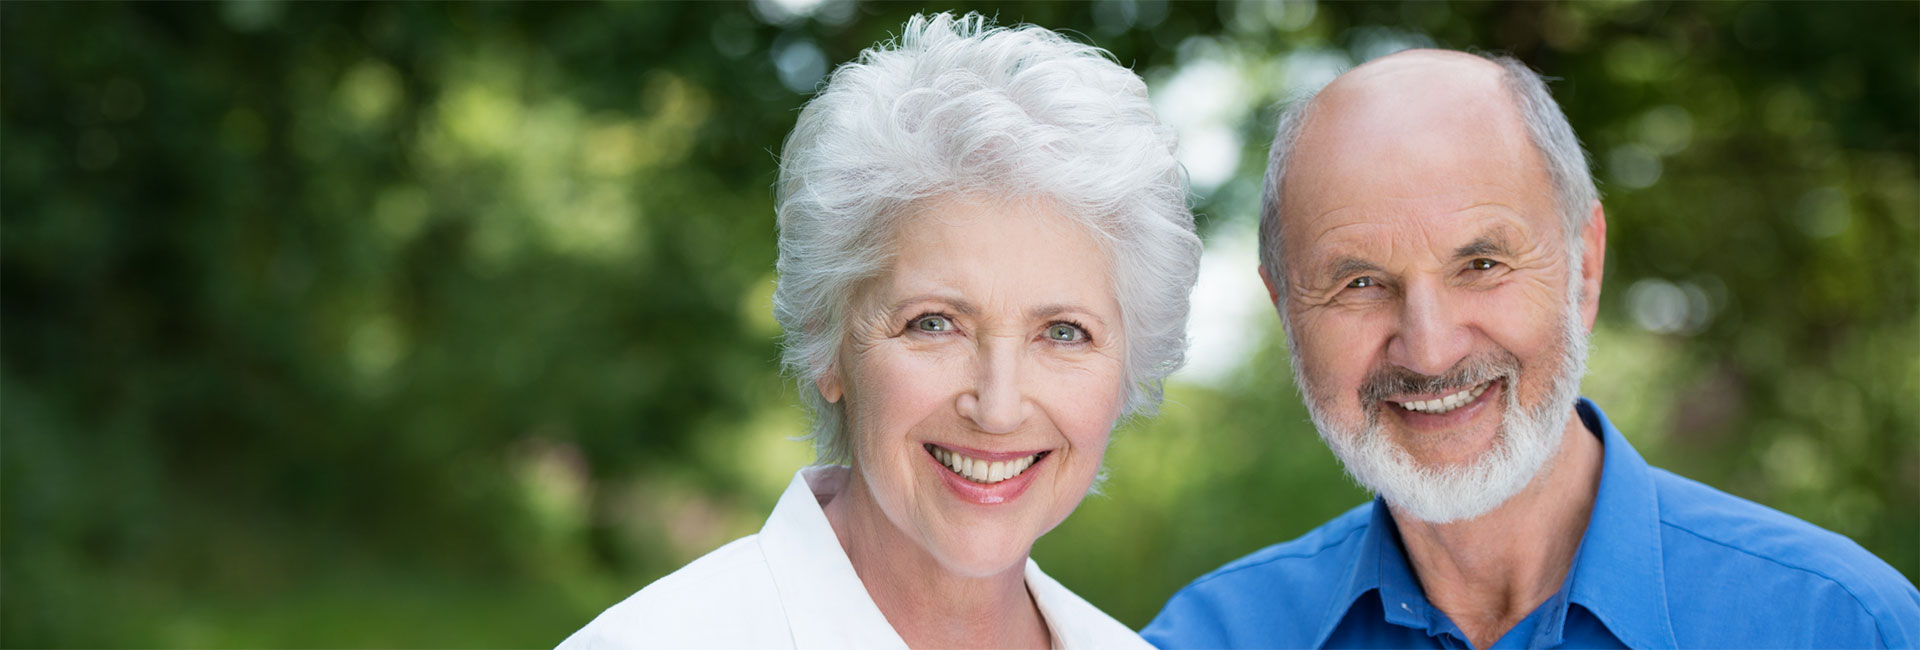 Smiling Elderly couple with great teeth